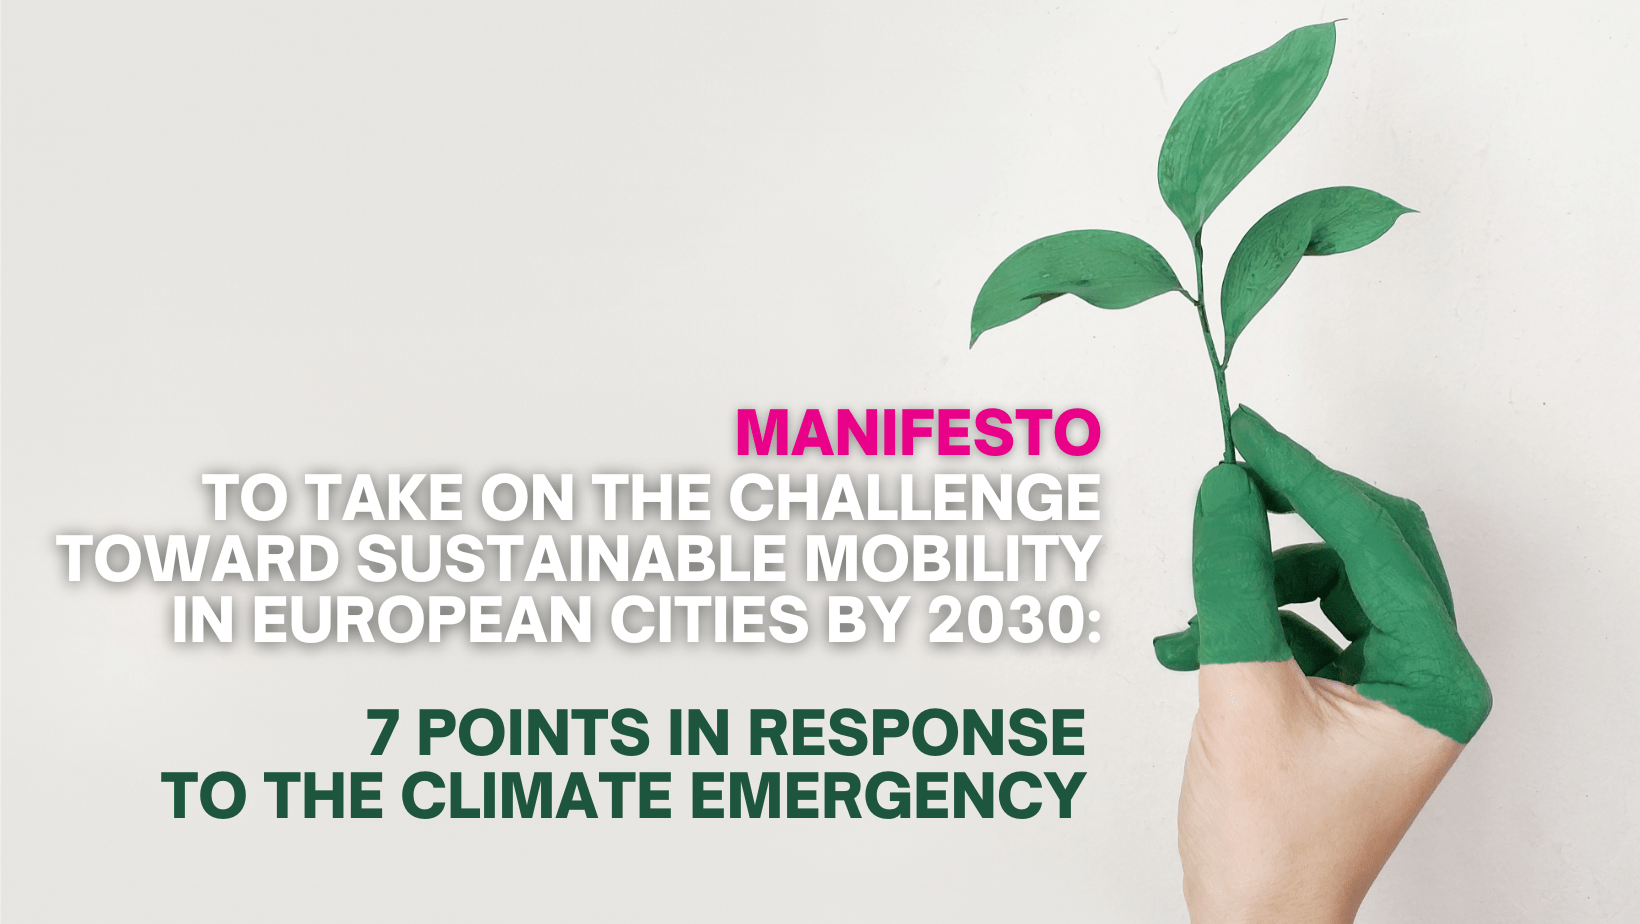 FIT Consulting launches a Manifesto to take on the challenge toward sustainable mobility in European cities by 2030